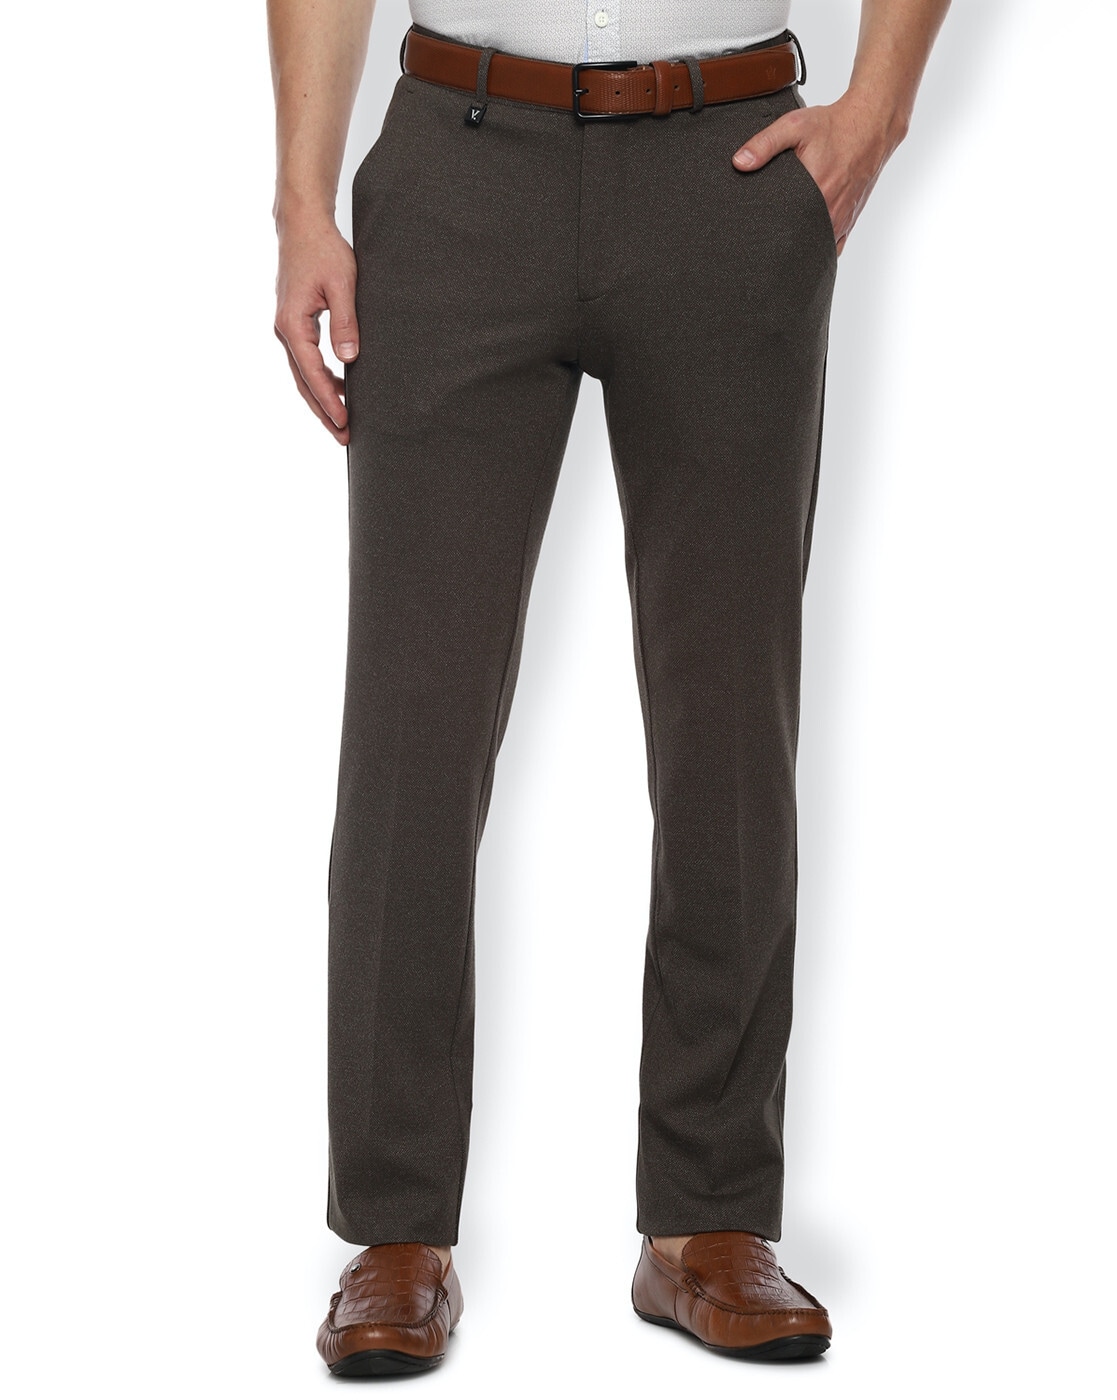 Buy Young Men's Slim Fit Chino Pants. size 0-8 Waist From 25 30 Inches  Online in India - Etsy